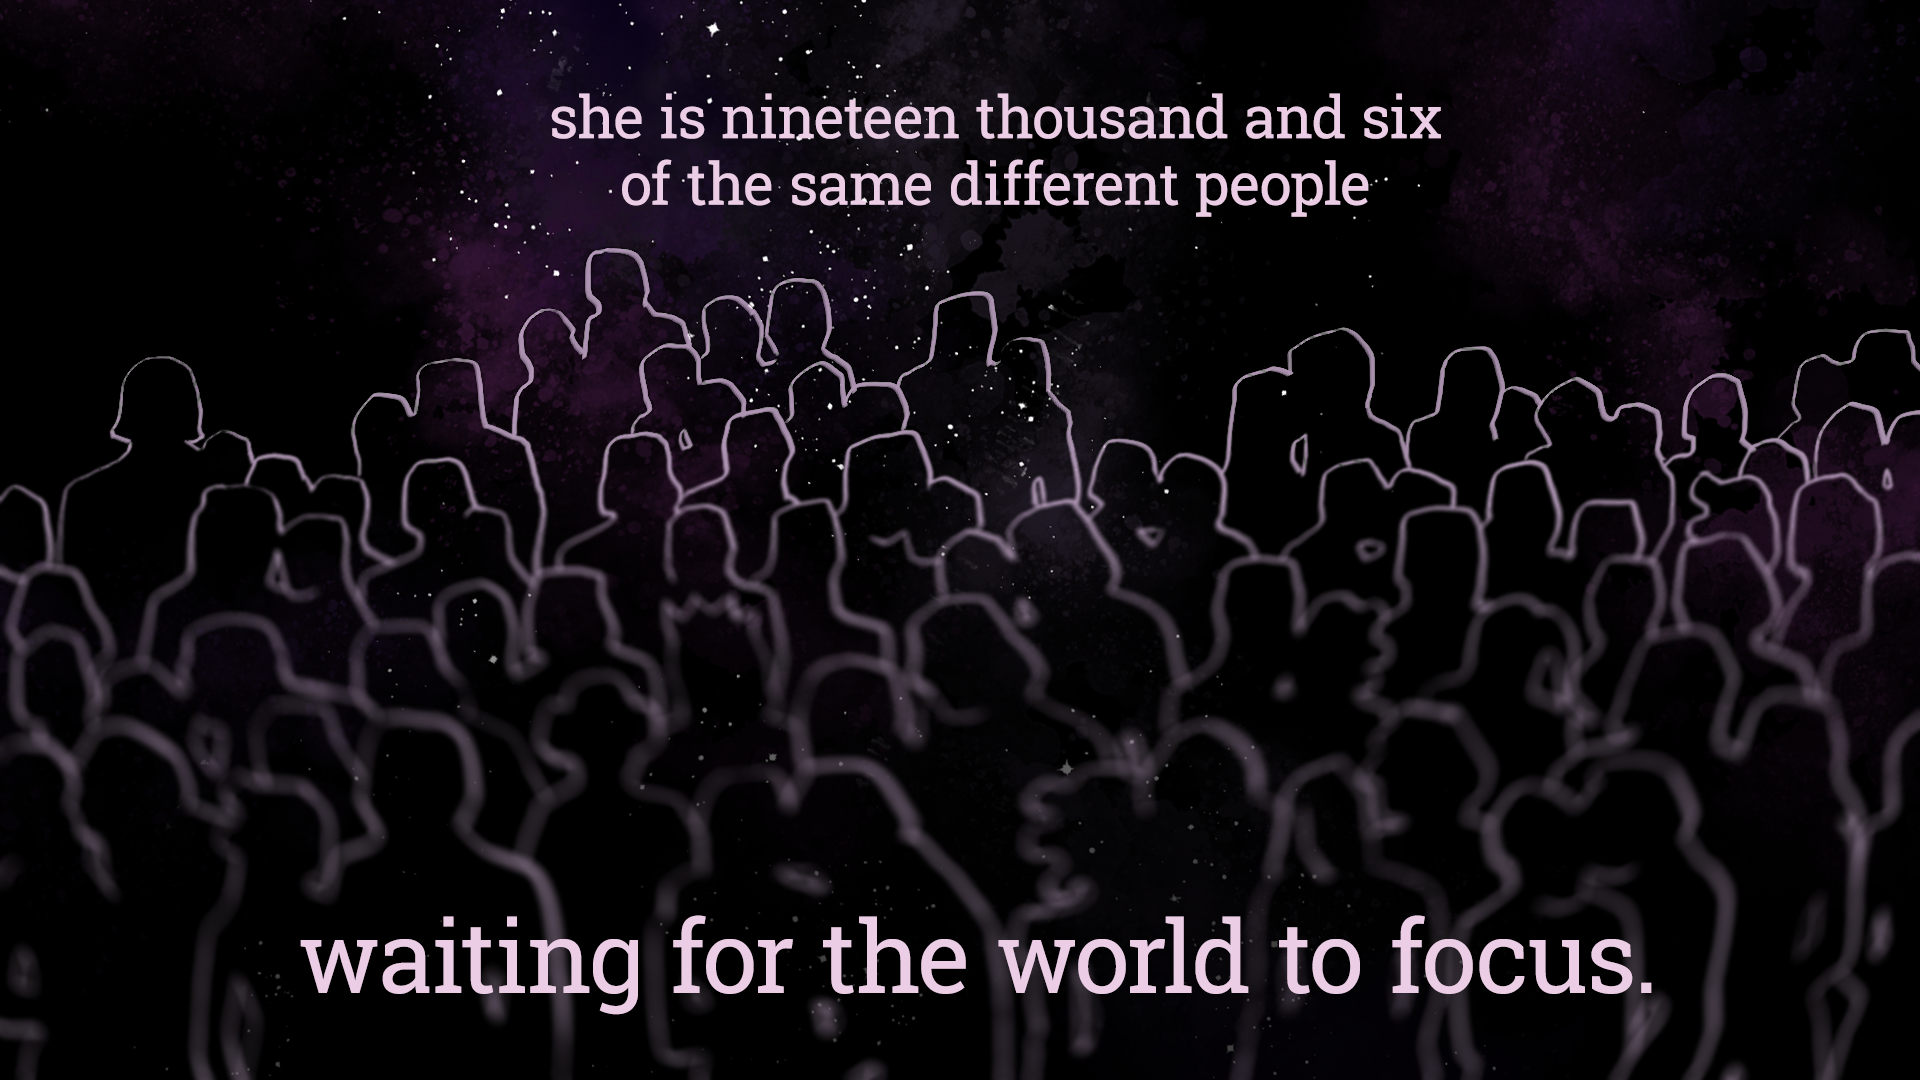 "she is nineteen thousand and six of the same different people, waiting for the world to focus." Image of a crowd of silhouettes, out of focus against the night sky.